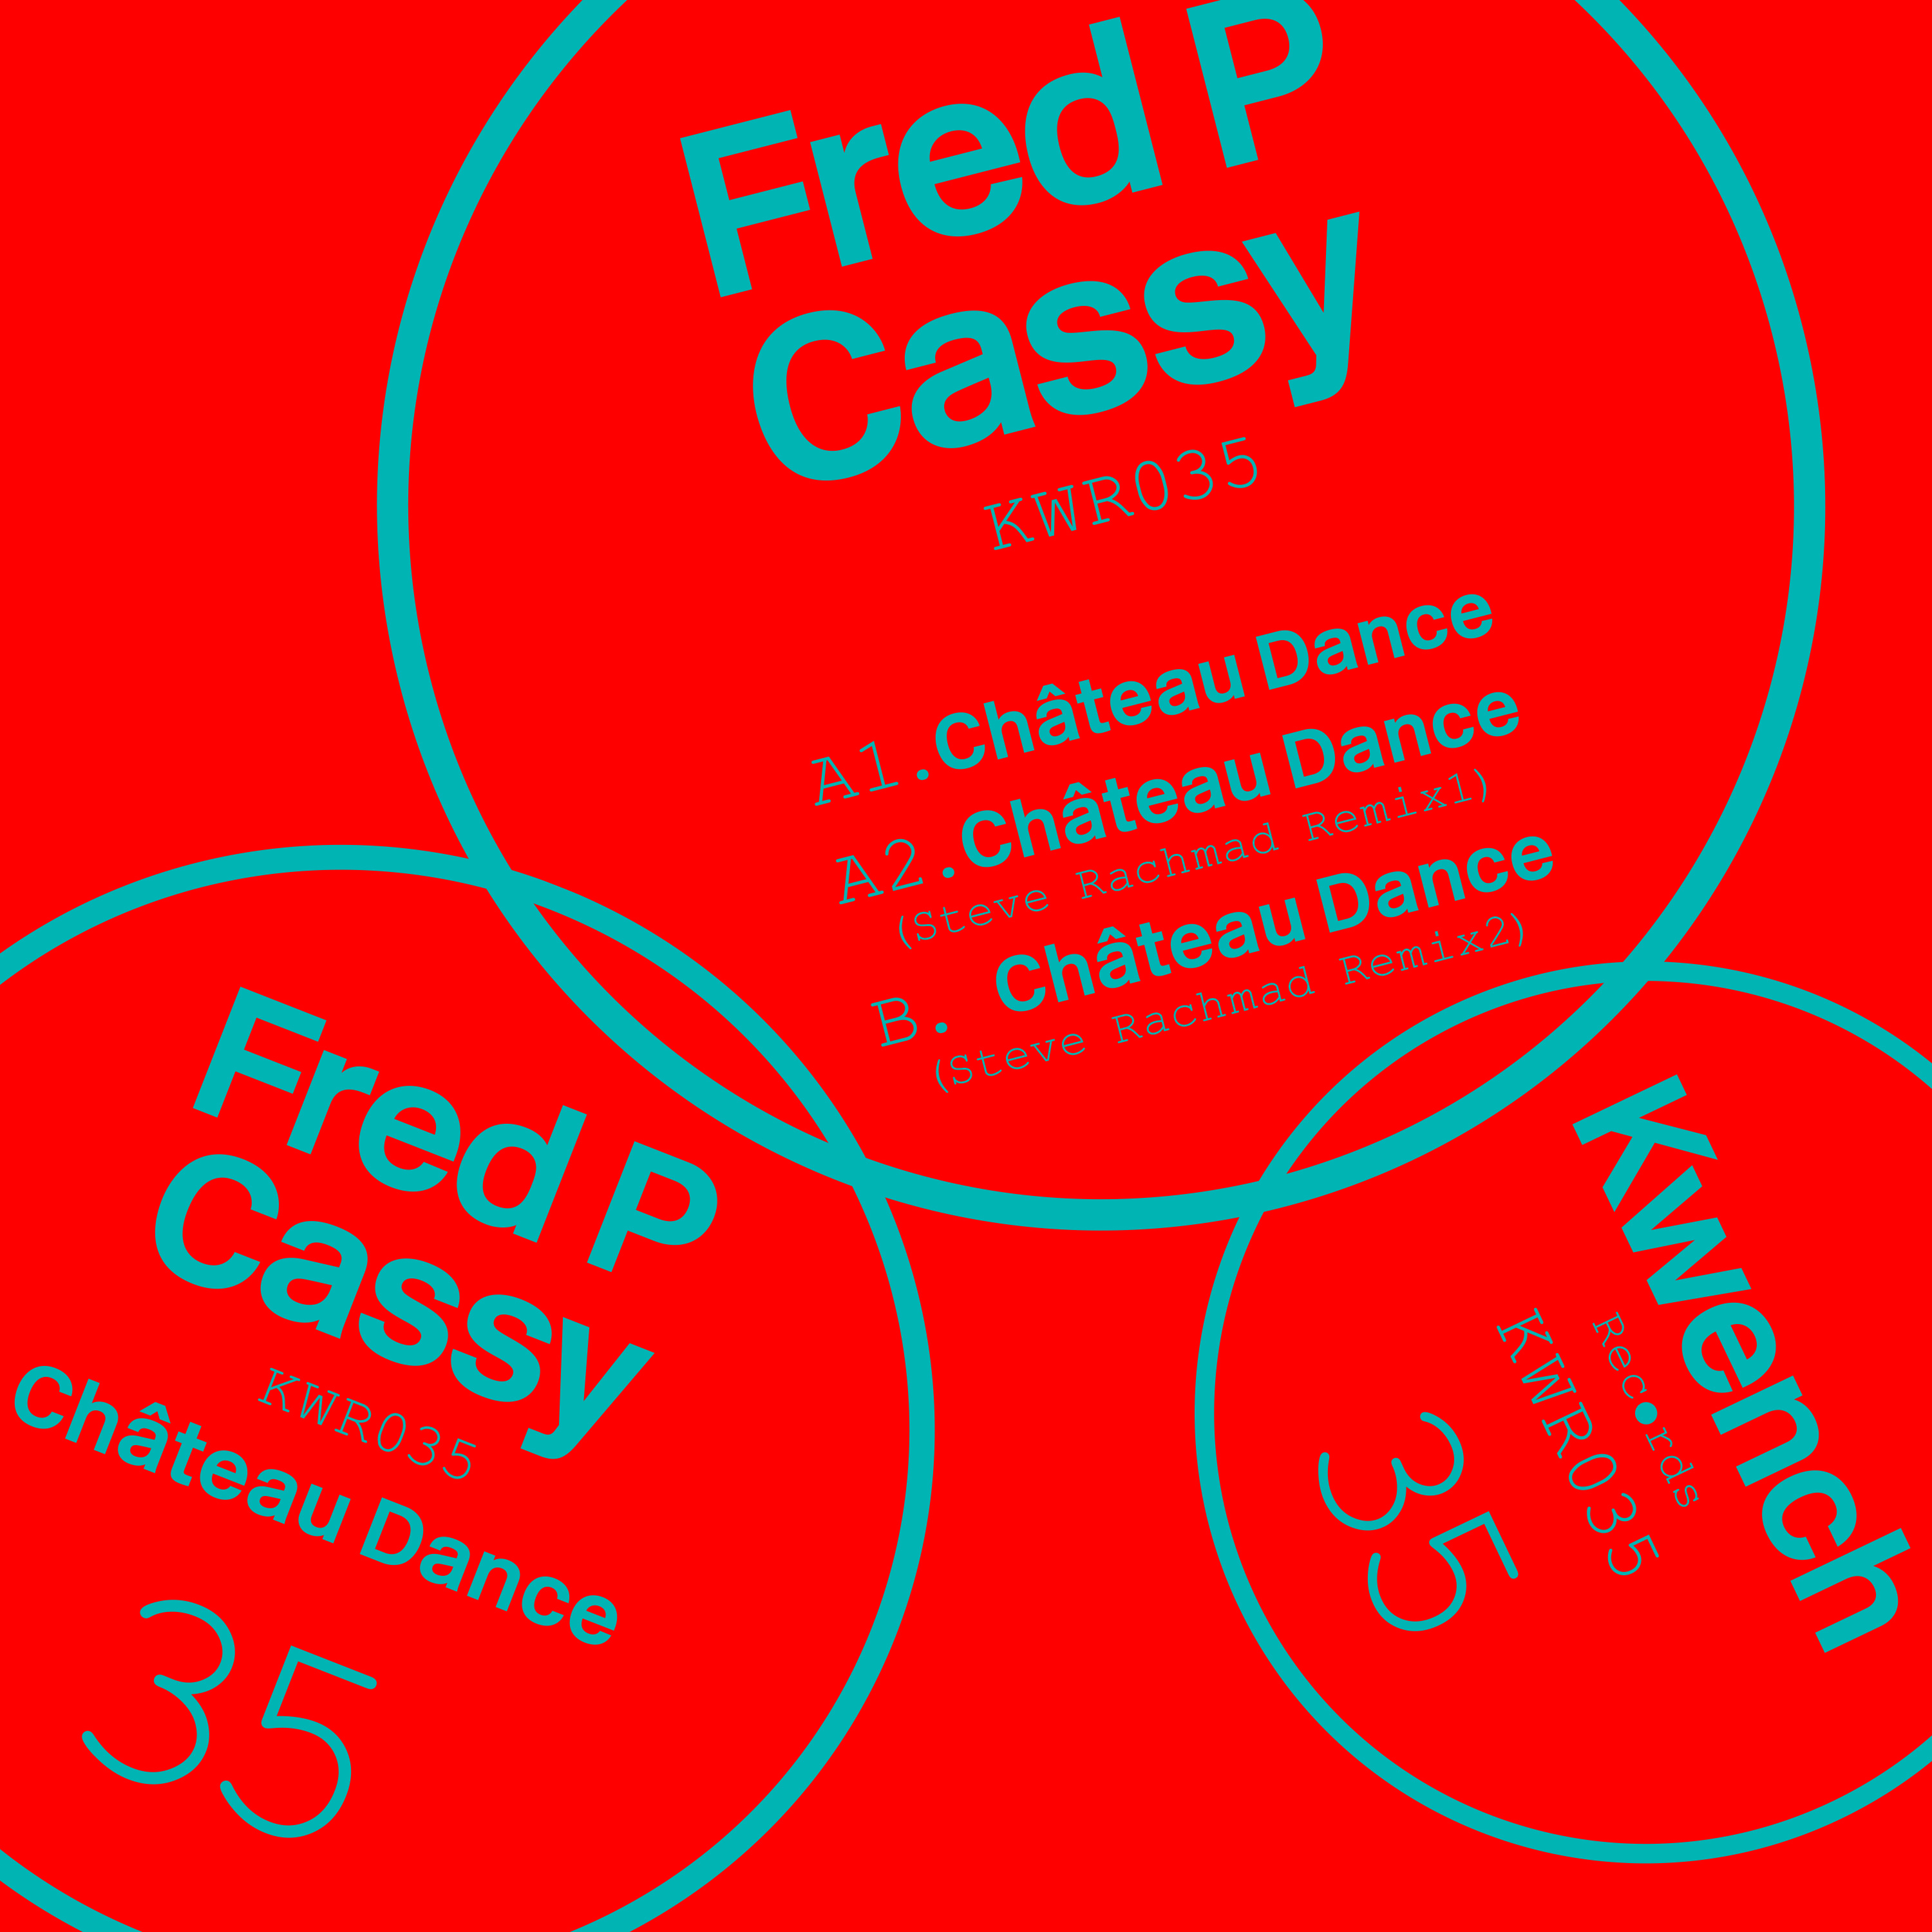 Fred P & Cassy/CHATEAU DANCE 12